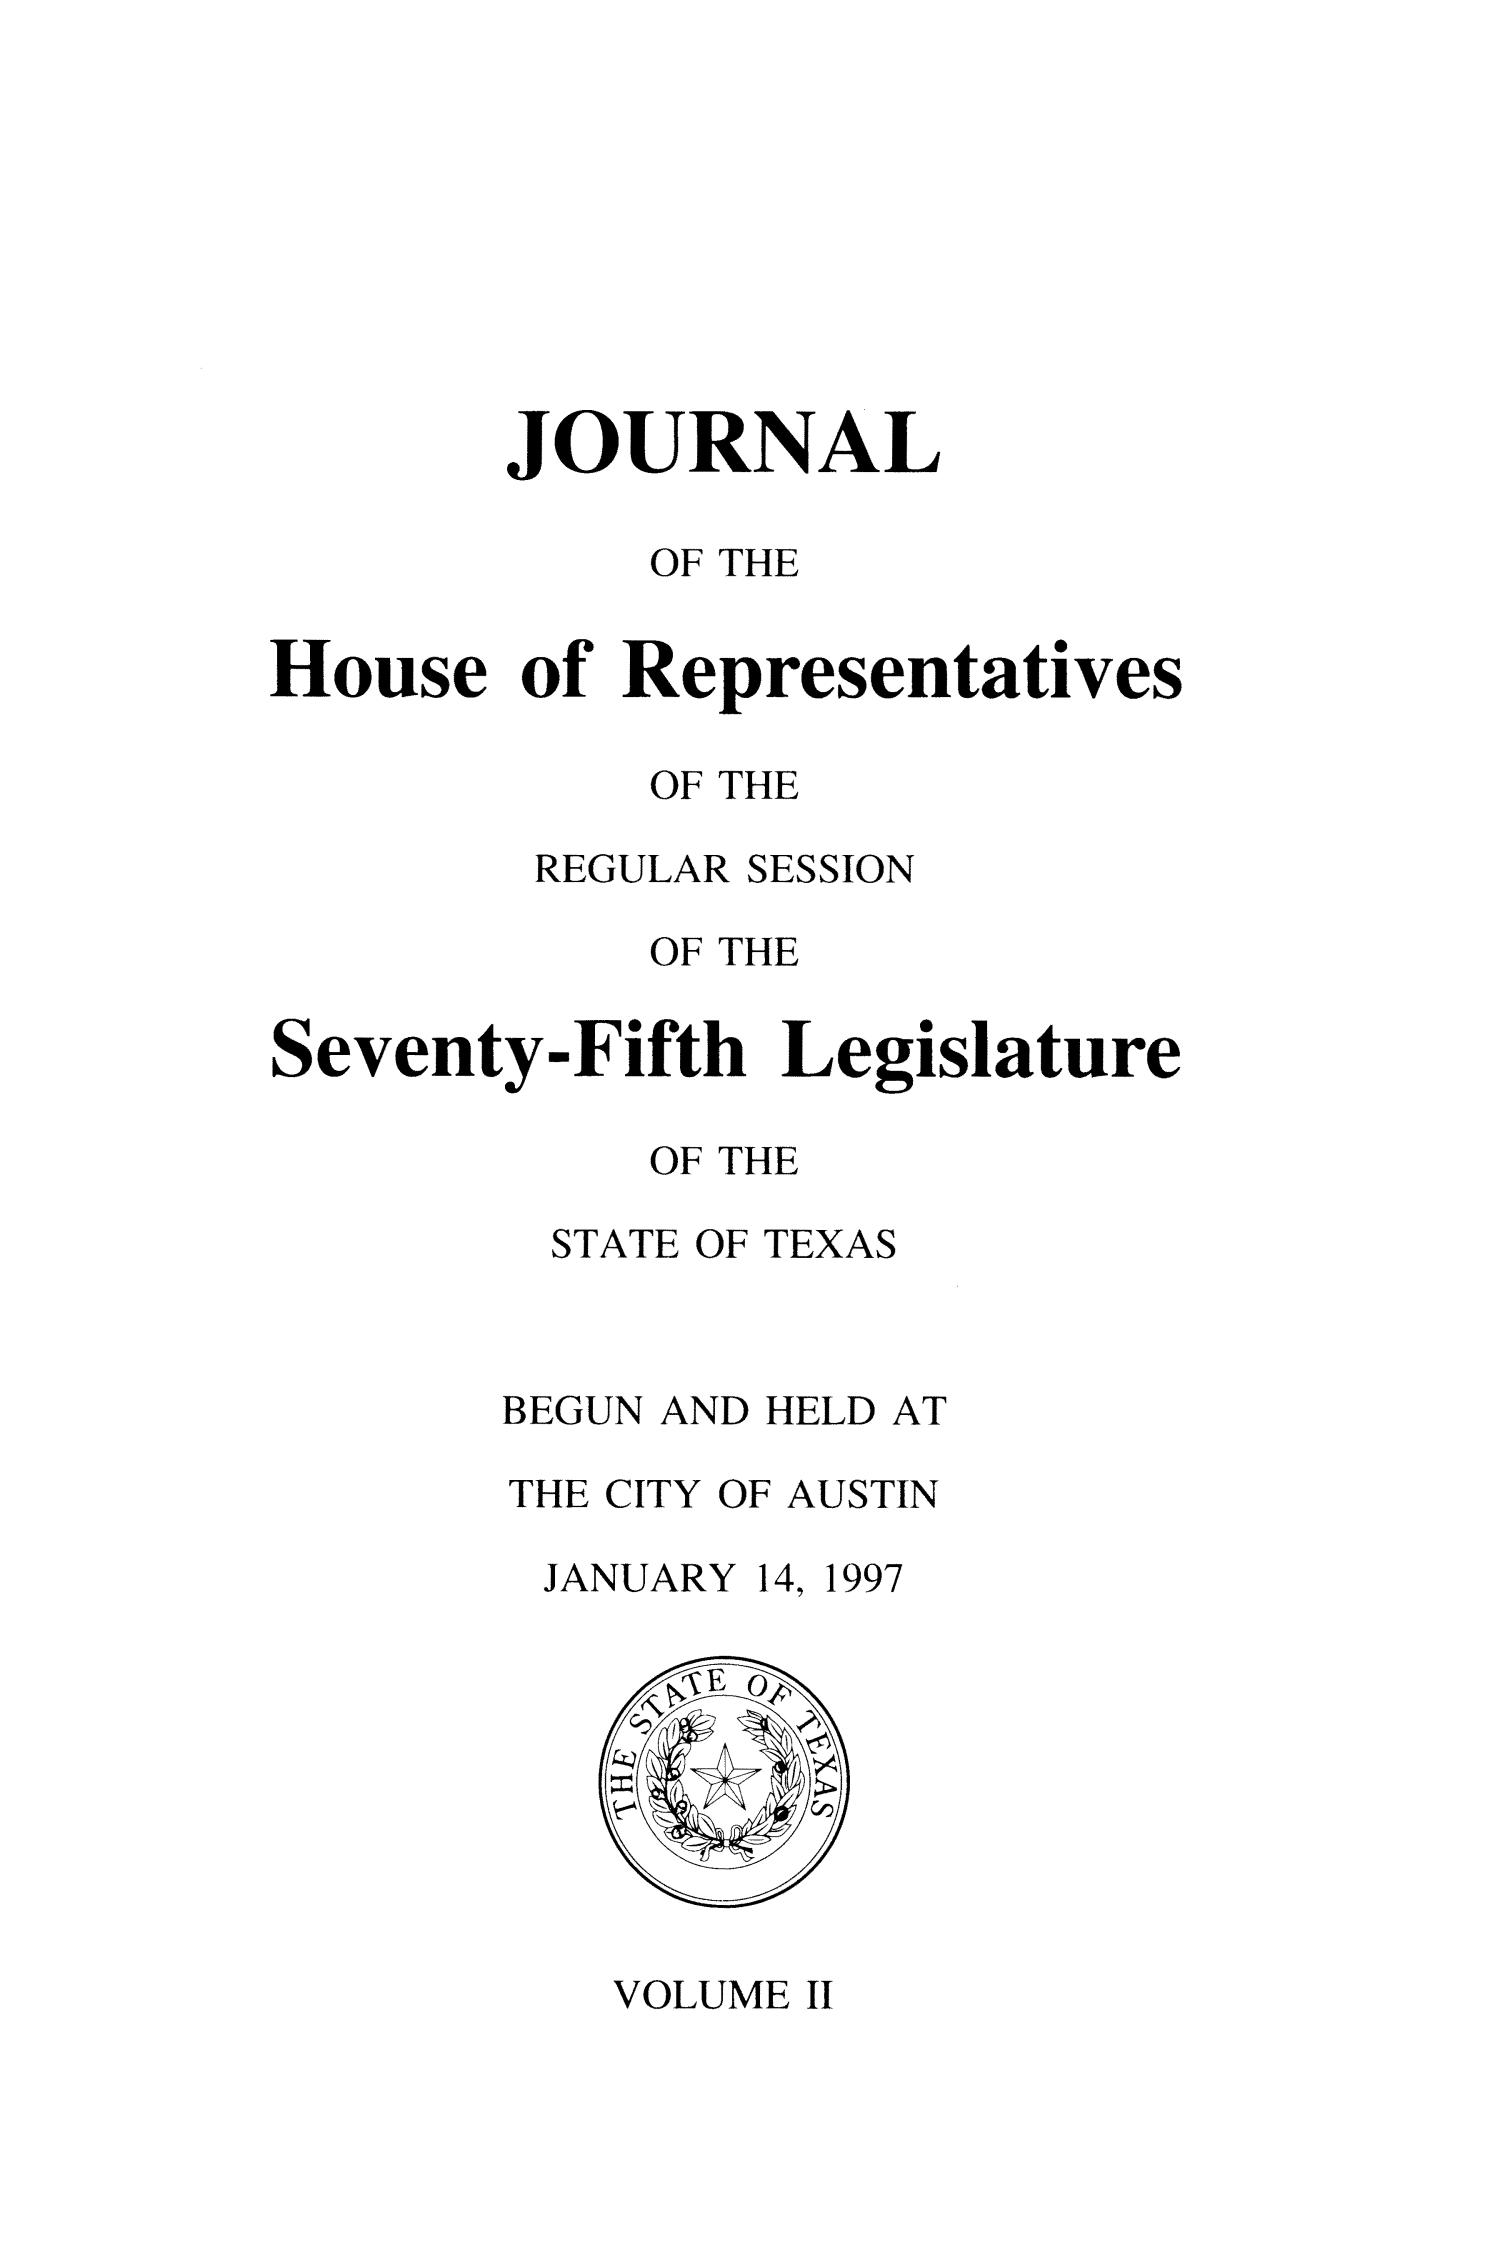 Journal of the House of Representatives of the Regular Session of the Seventy-Fifth Legislature of the State of Texas, Volume 2
                                                
                                                    Title Page
                                                